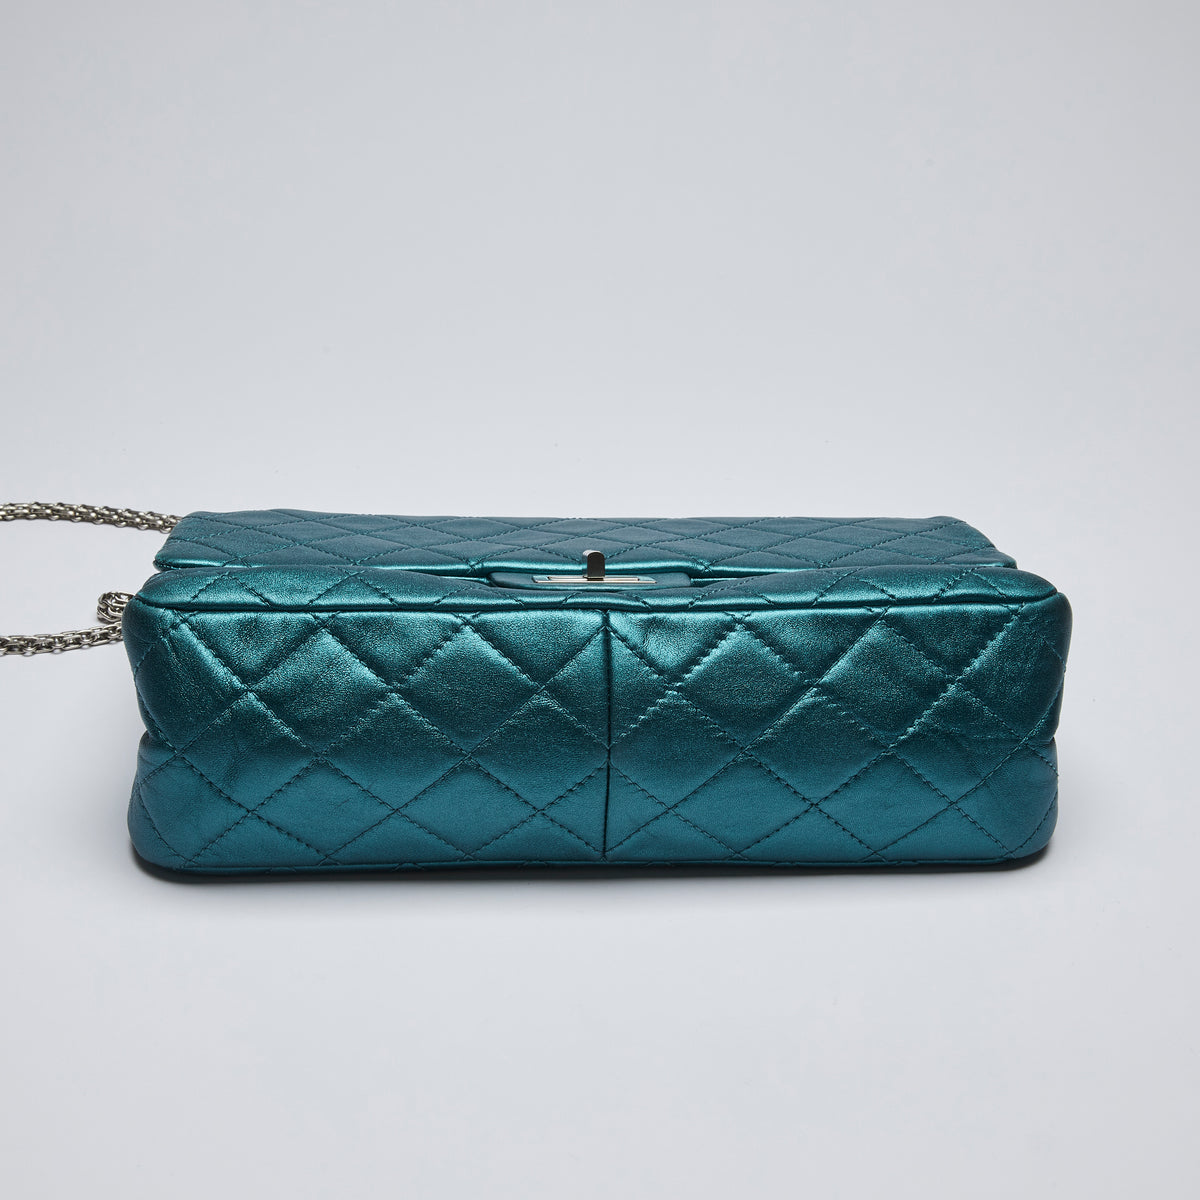 Excellent Pre-Loved Teal Metallic Leather Large Double Flap Bag with Ruthenium Bijou Chain and Turn Lock.(bottom)